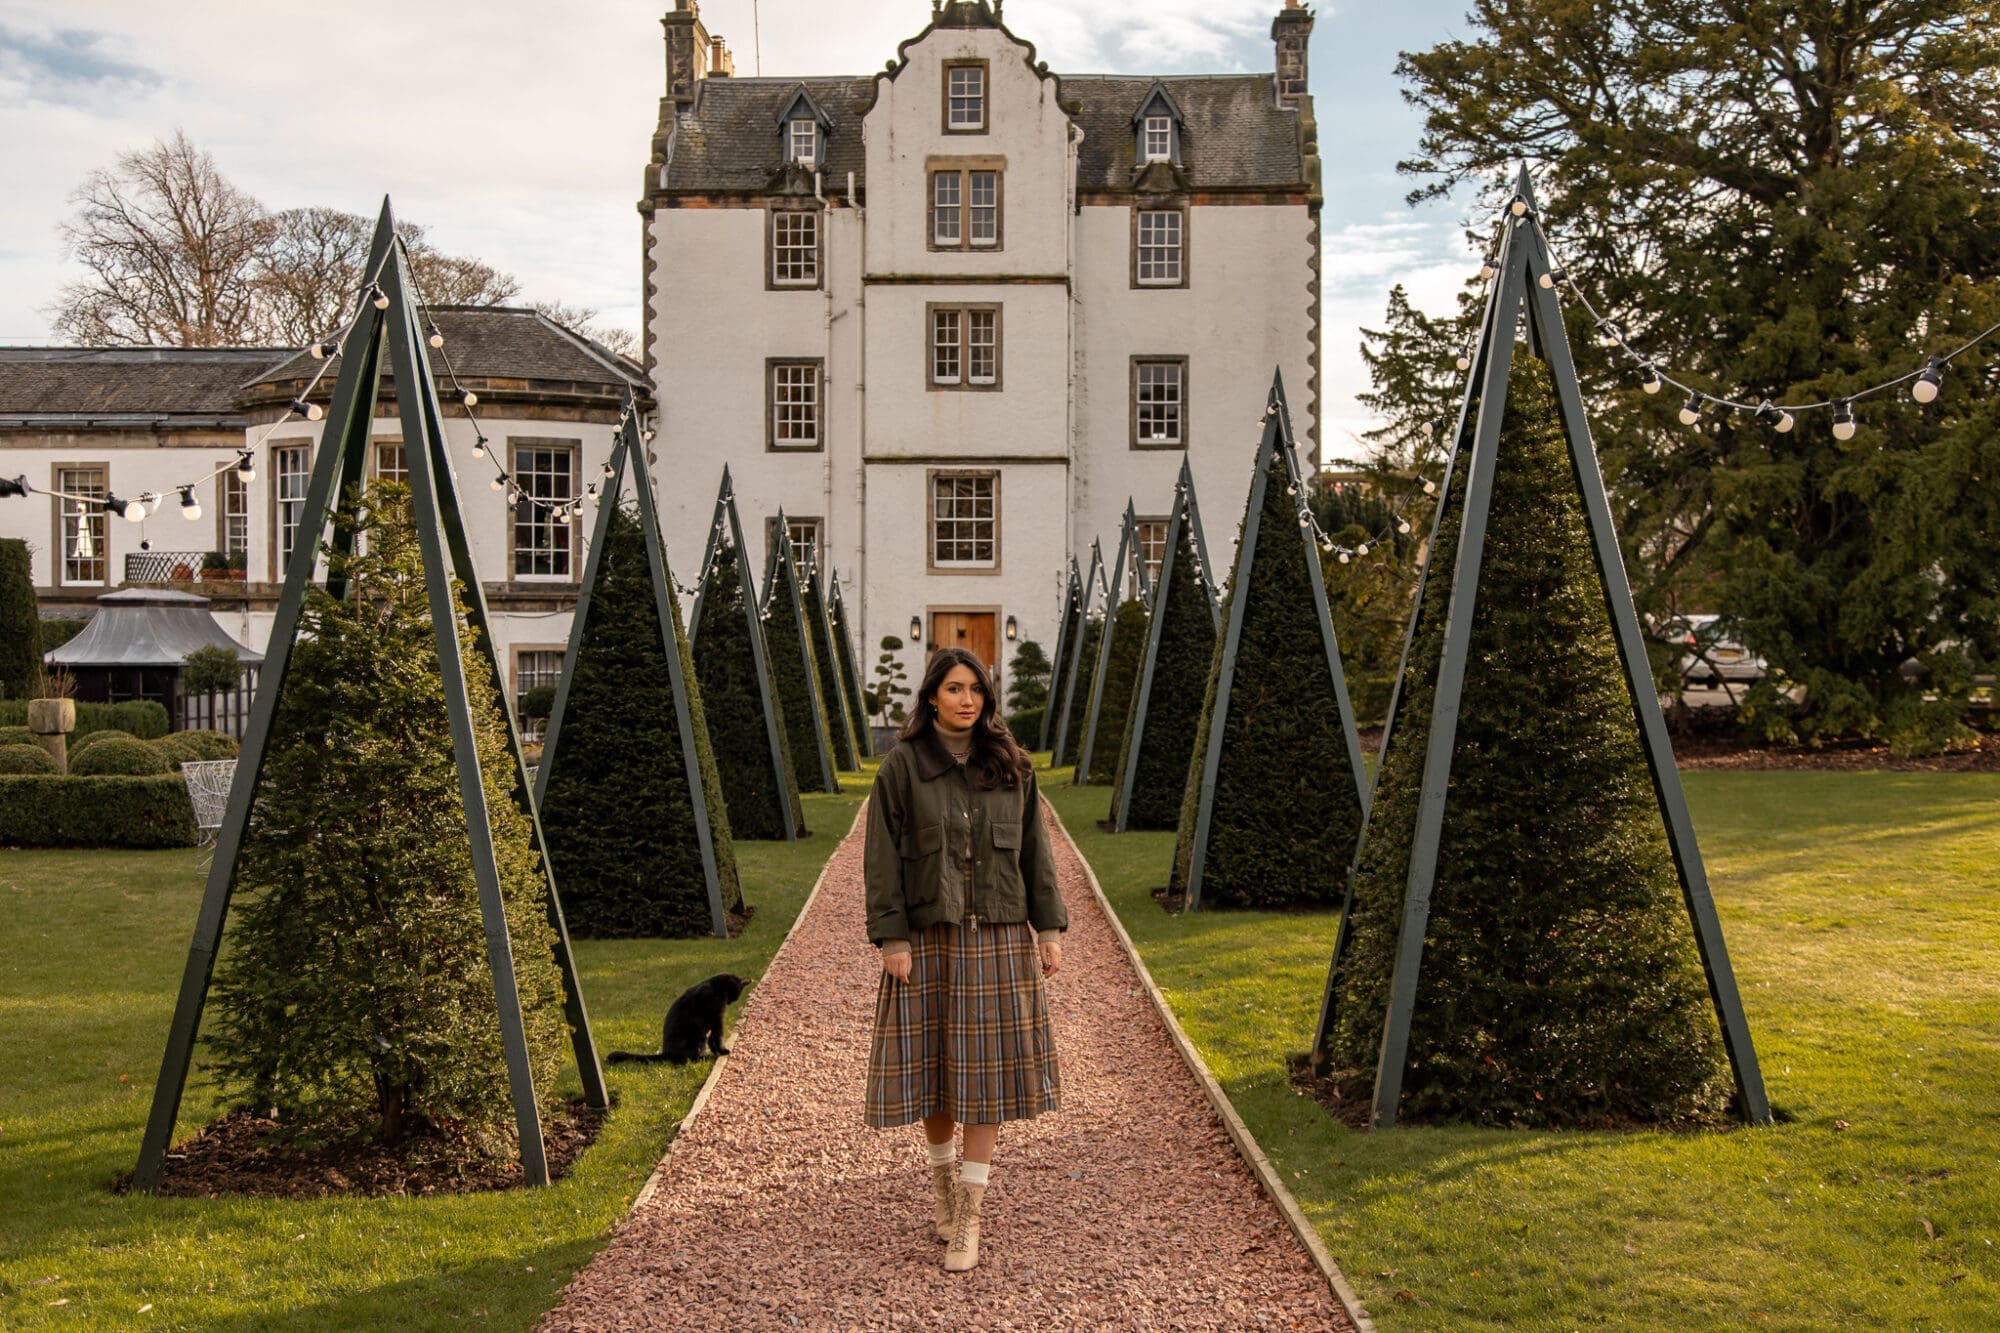 In the grounds of Prestonfield House Hotel in Edinburgh, Anoushka is wearing a checked skirt and walking on a path between triangular trees with the hotel in the background.